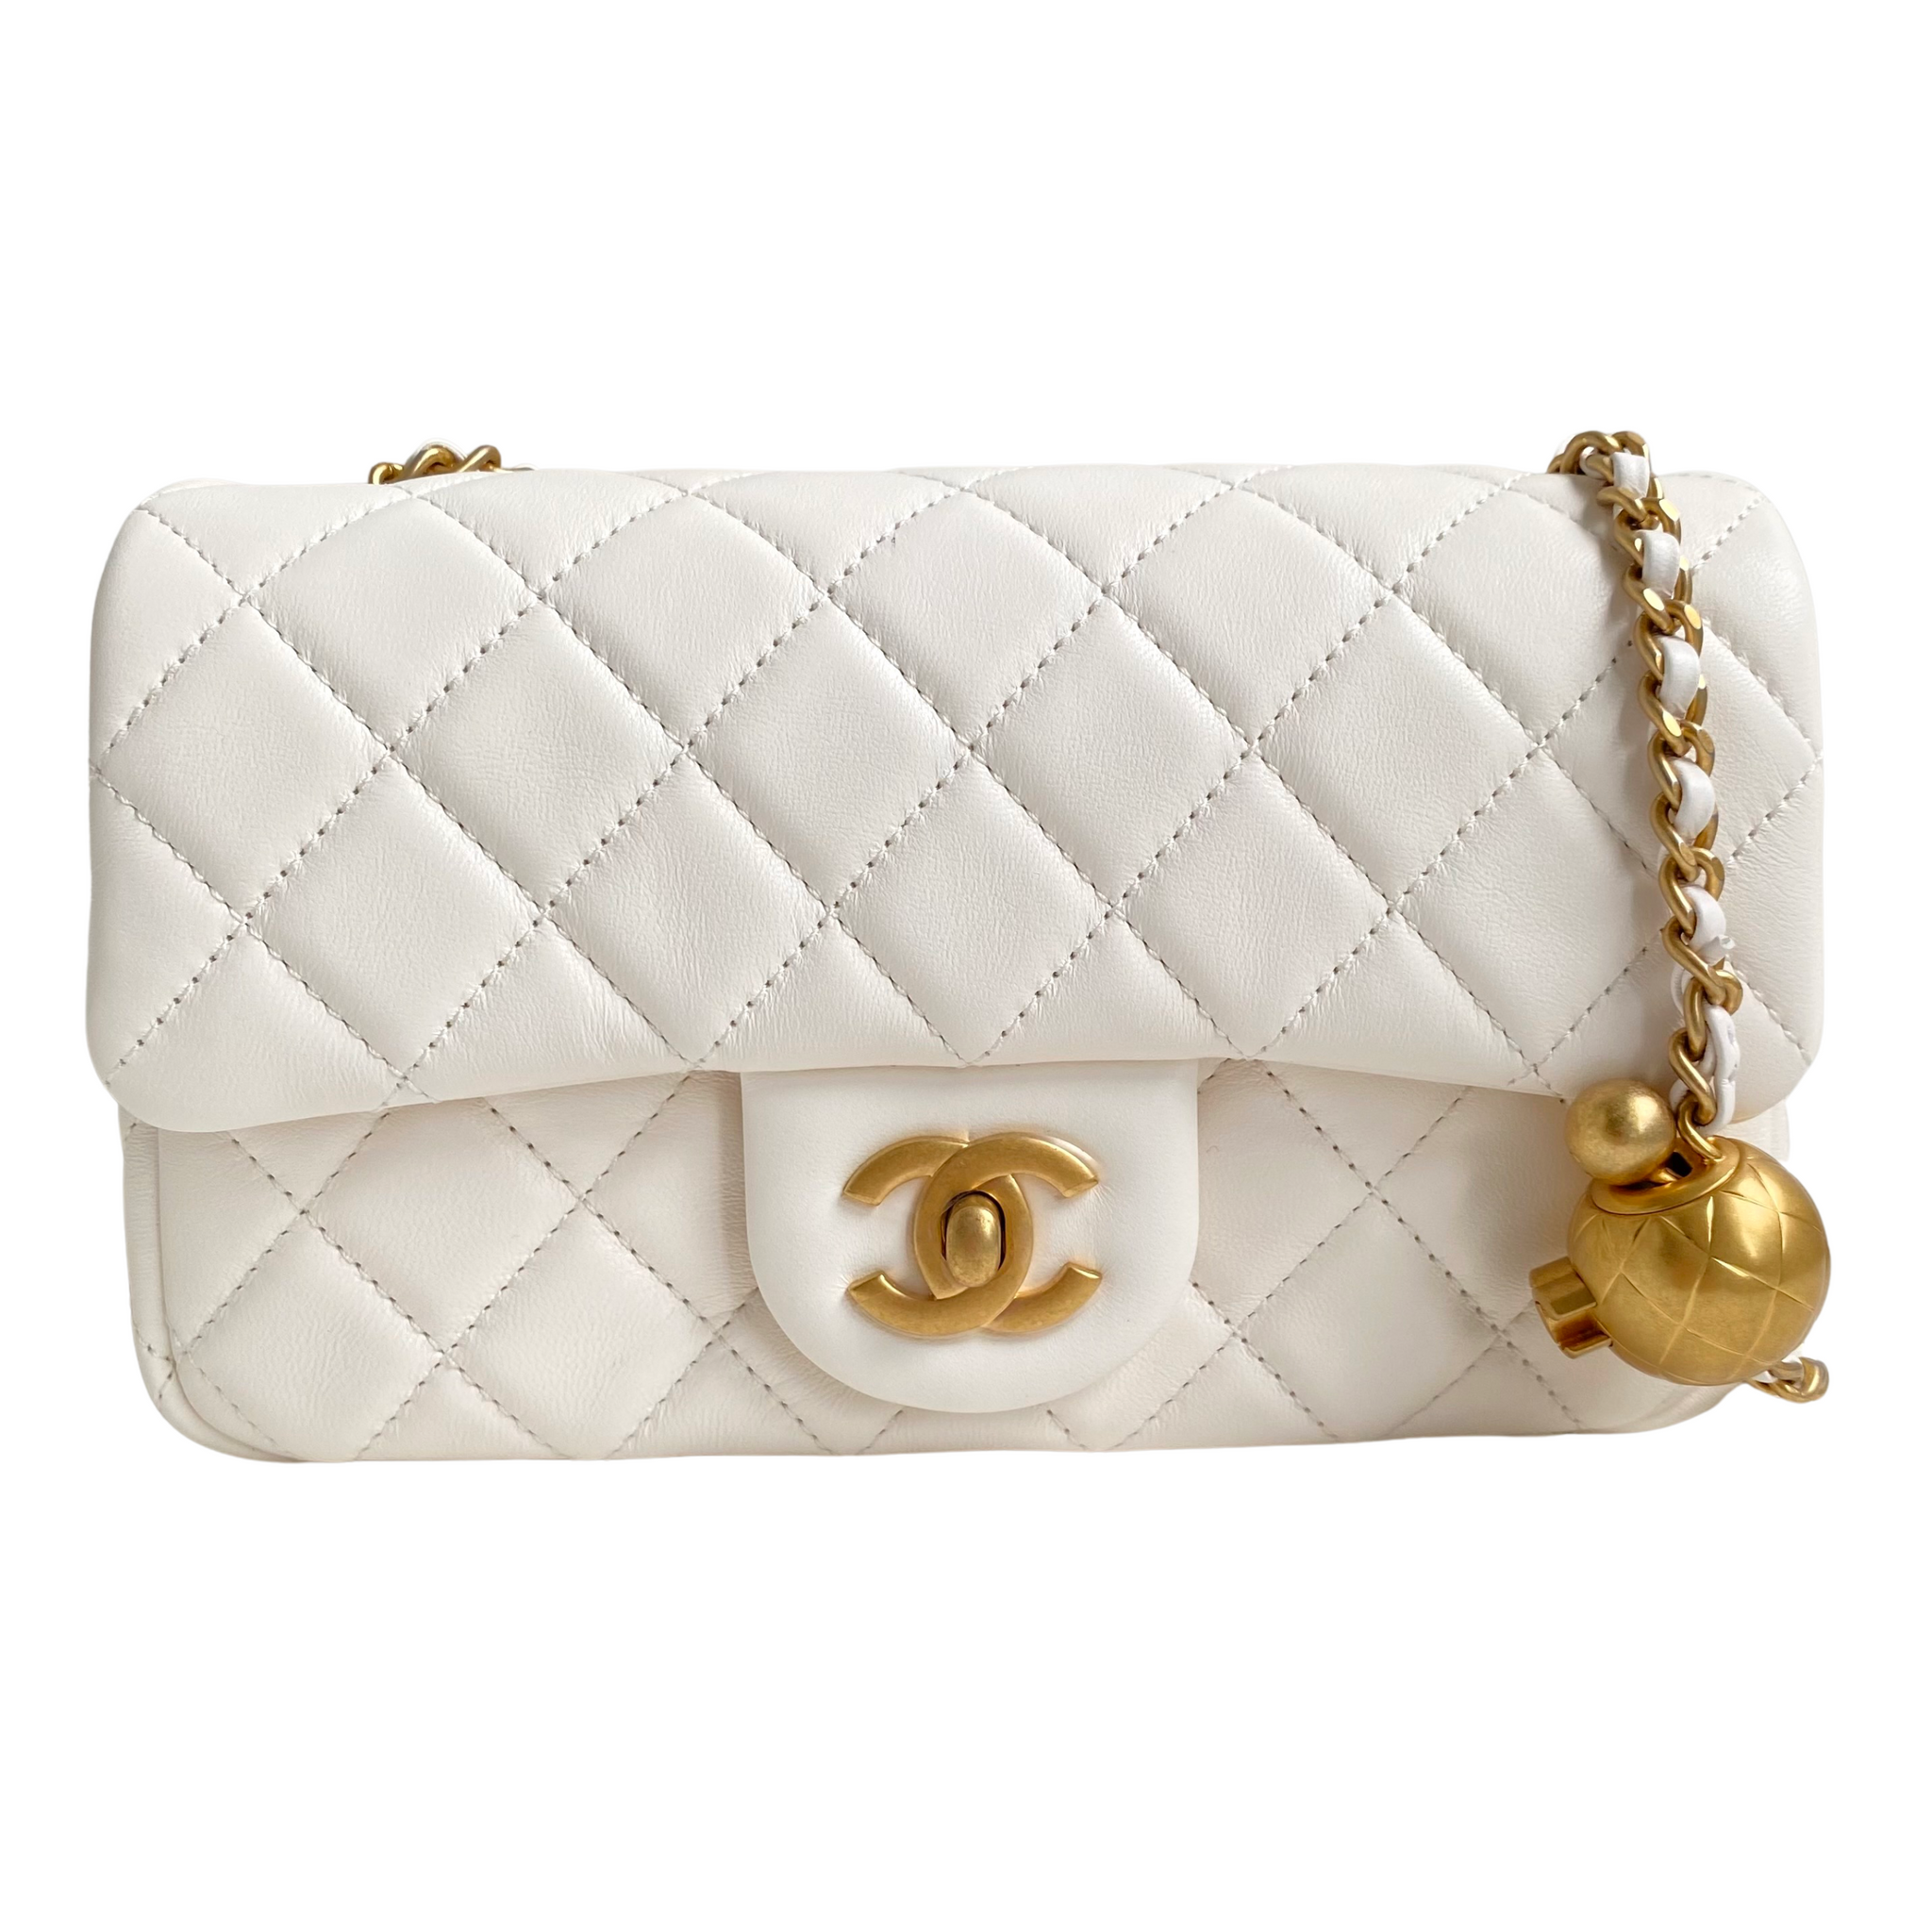 Chanel Navy Chic Pearls Small Flap Bag In Leather With Gold Hardware   Trésor Vintage